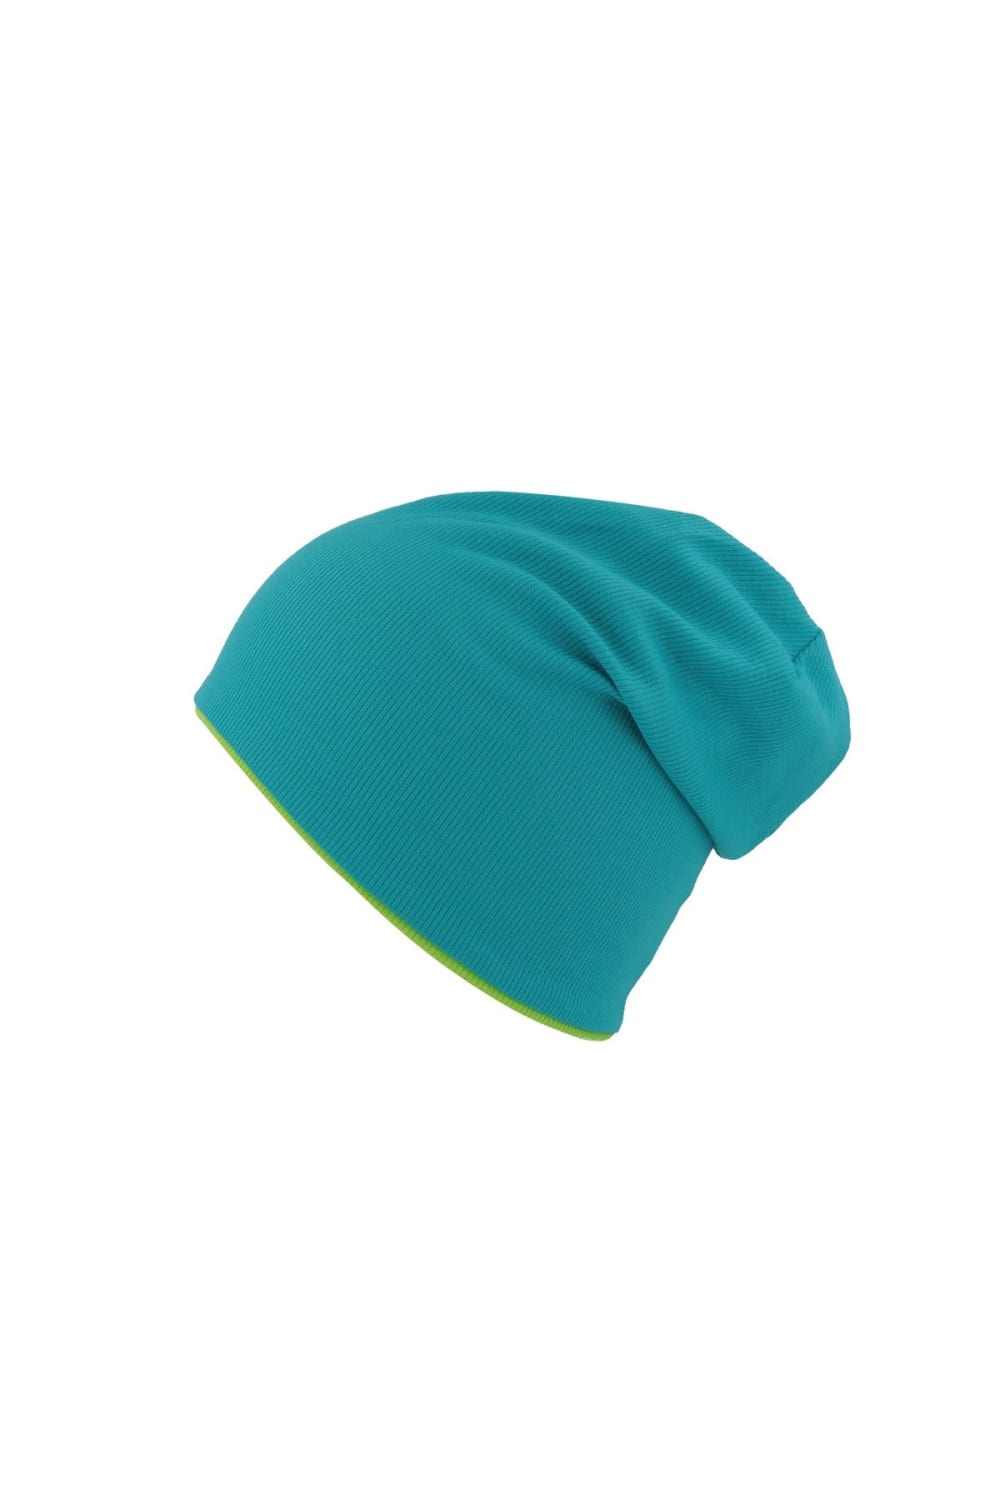 Extreme Reversible Jersey Slouch Beanie - Turquoise/Safety Green